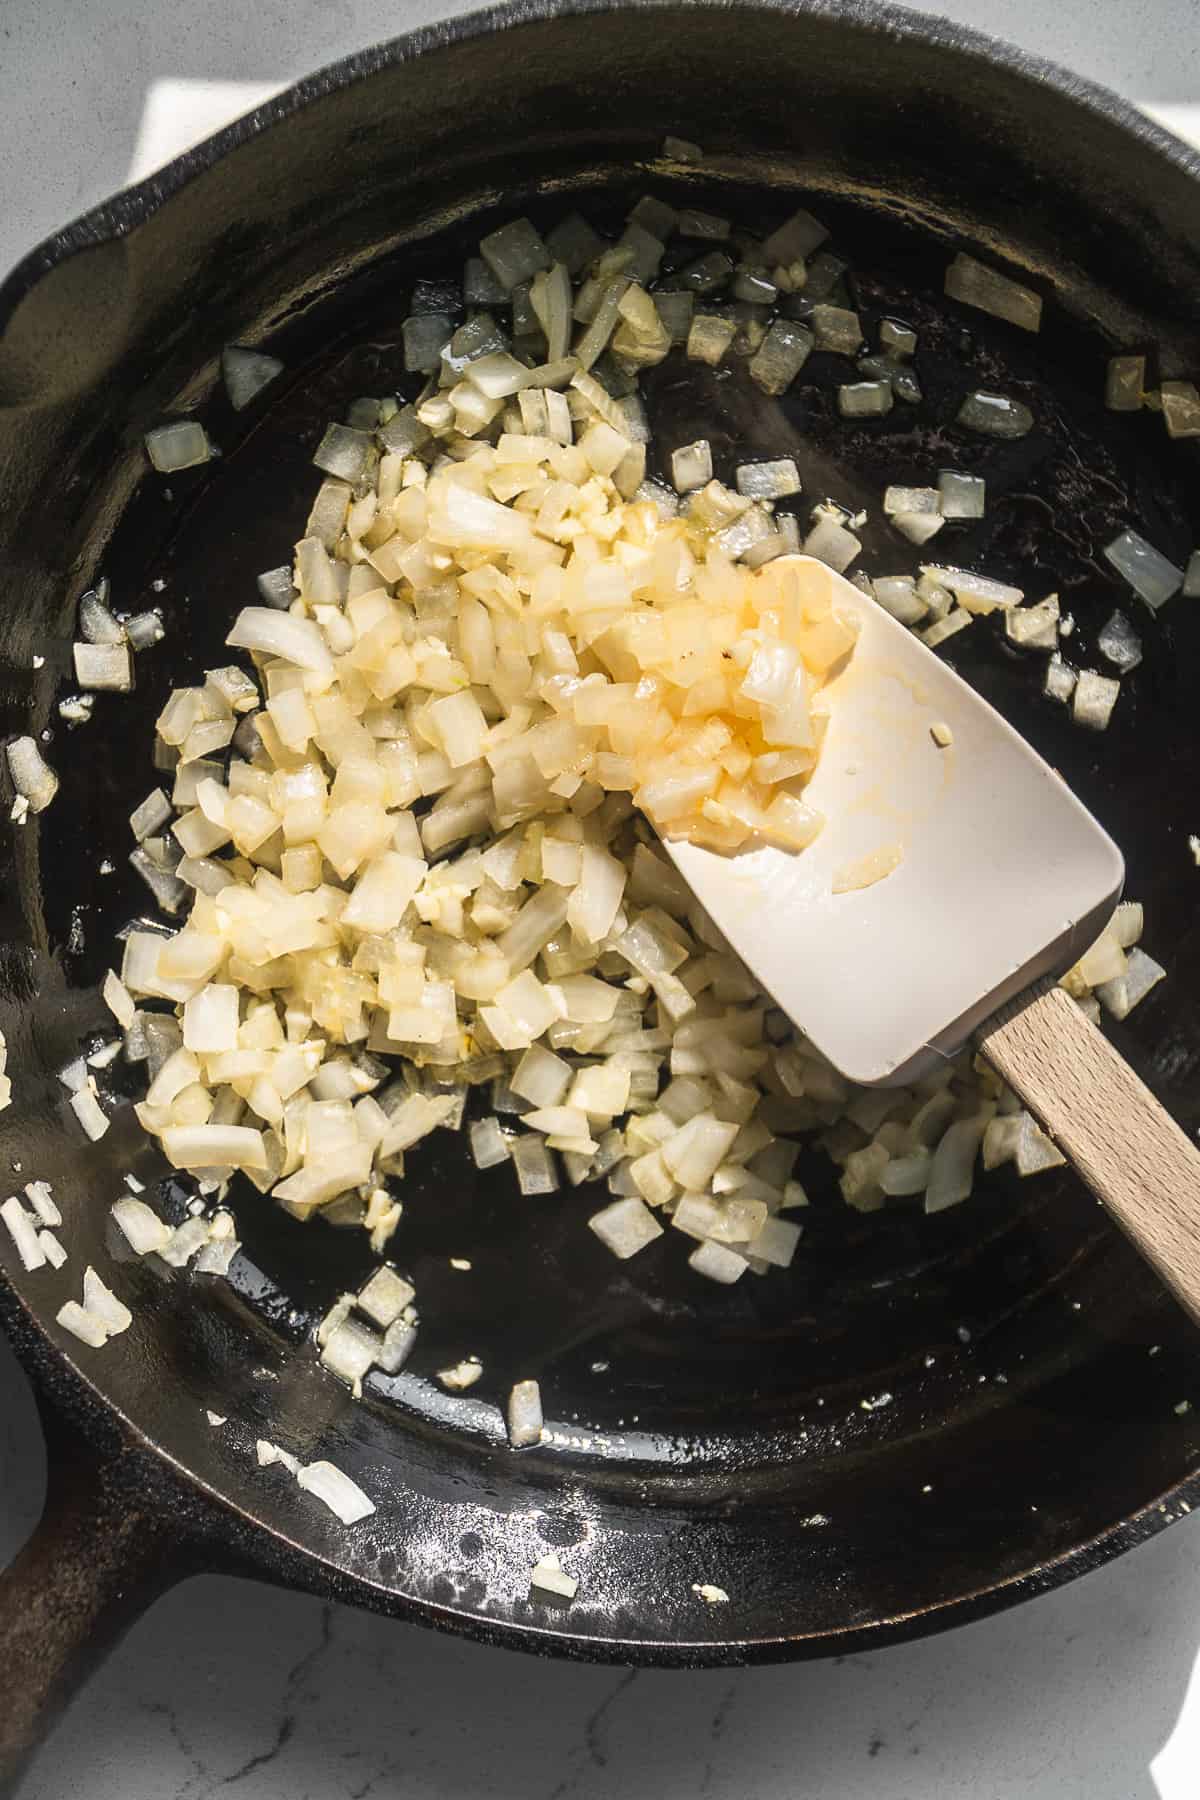 White onions cooking in a cast iron skillet.